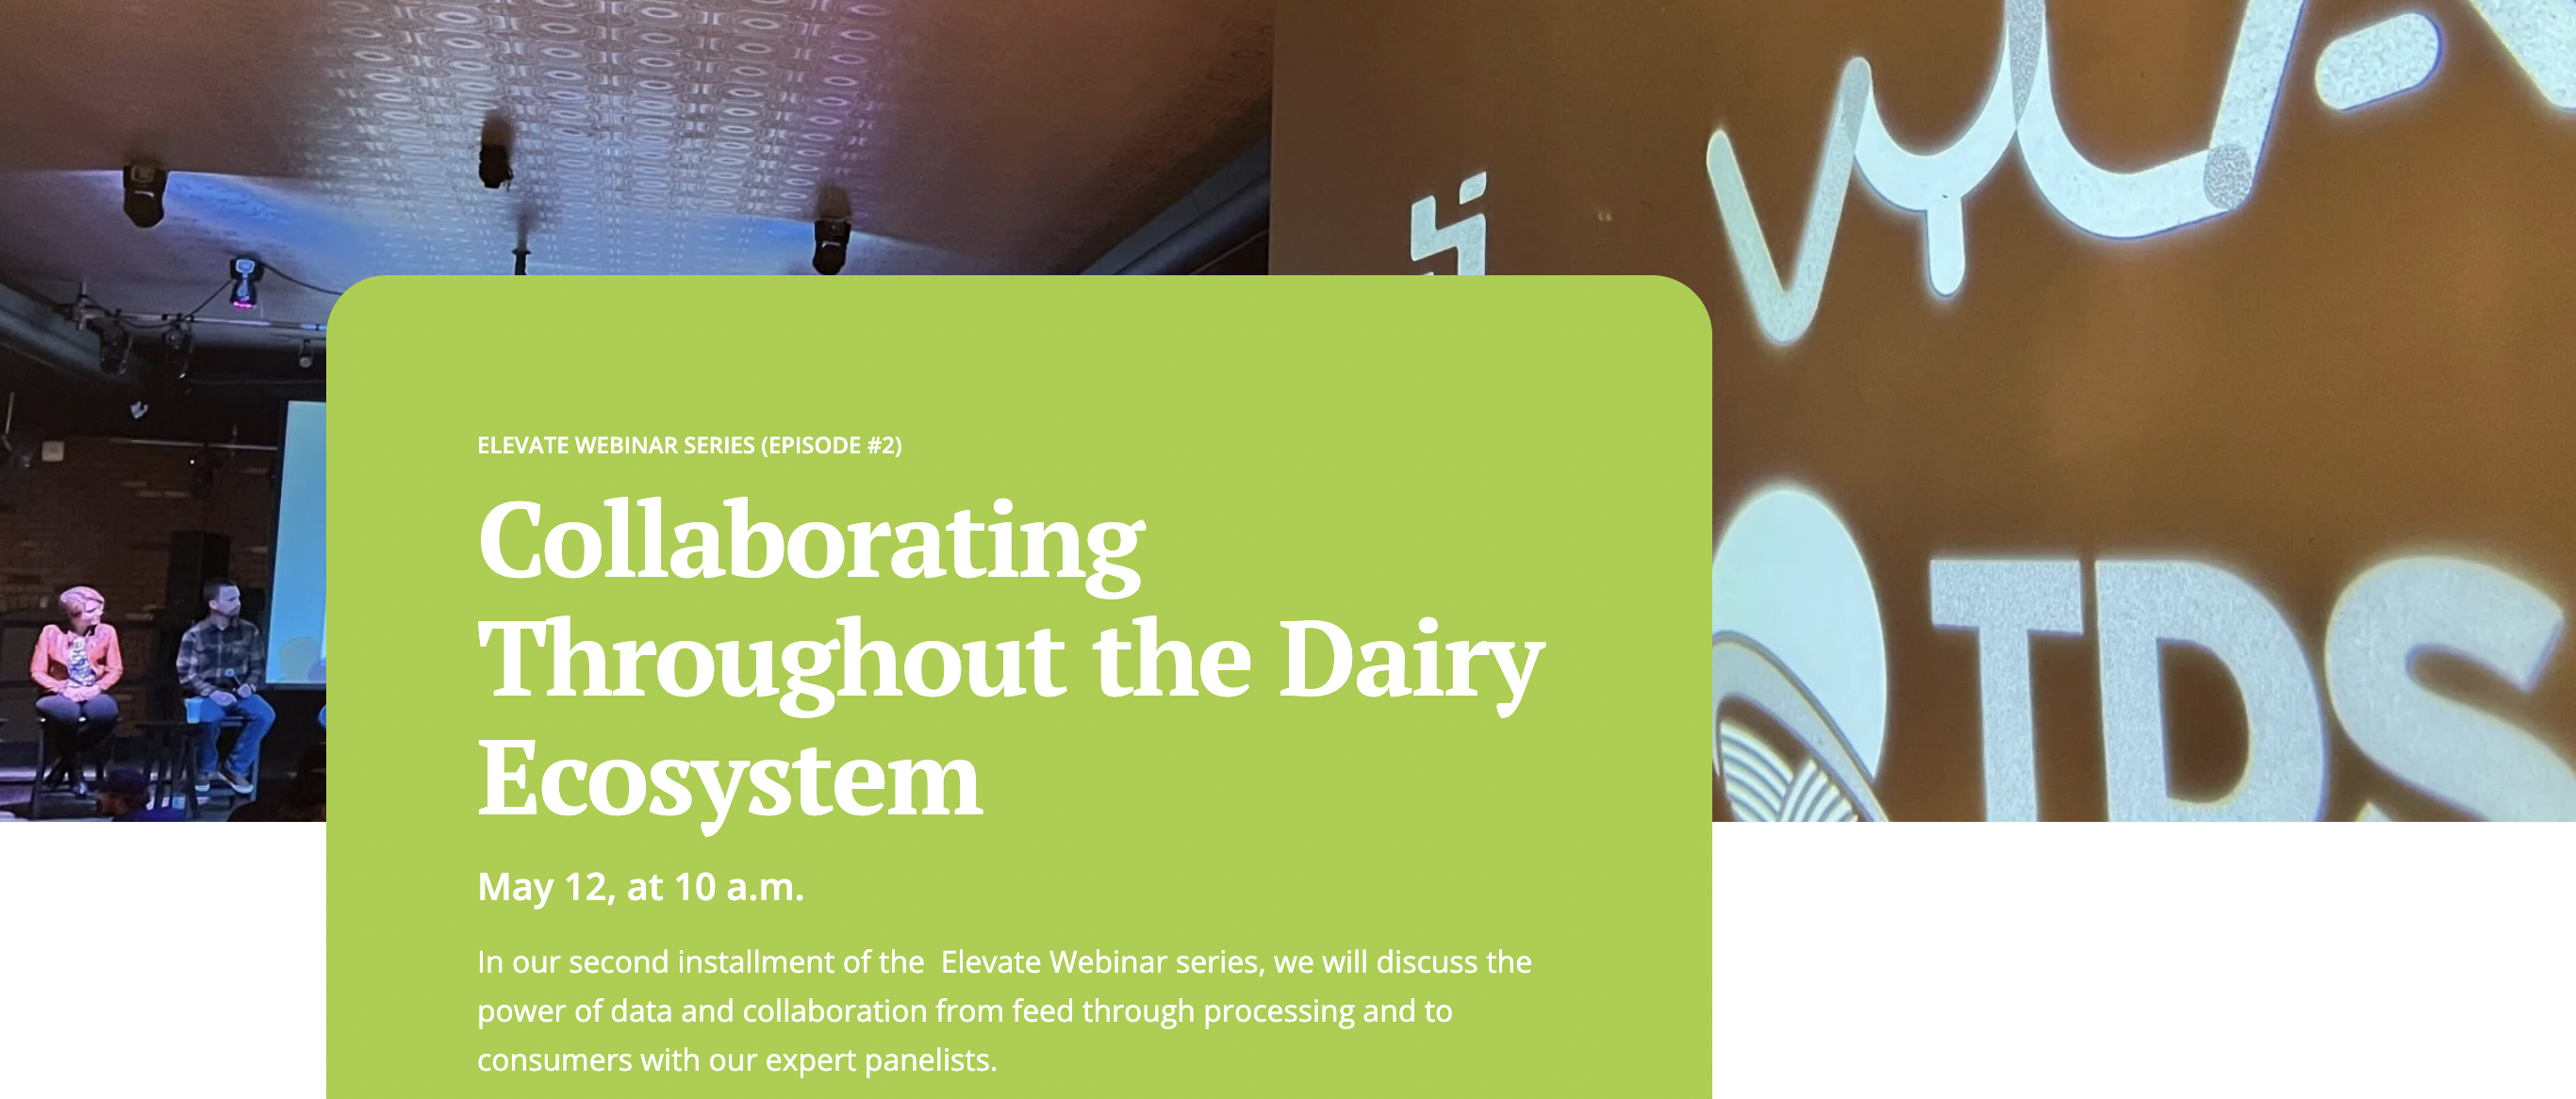 Elevate Webinar Series to Focus on Collaboration and the Power of Data Throughout the Dairy Ecosystem